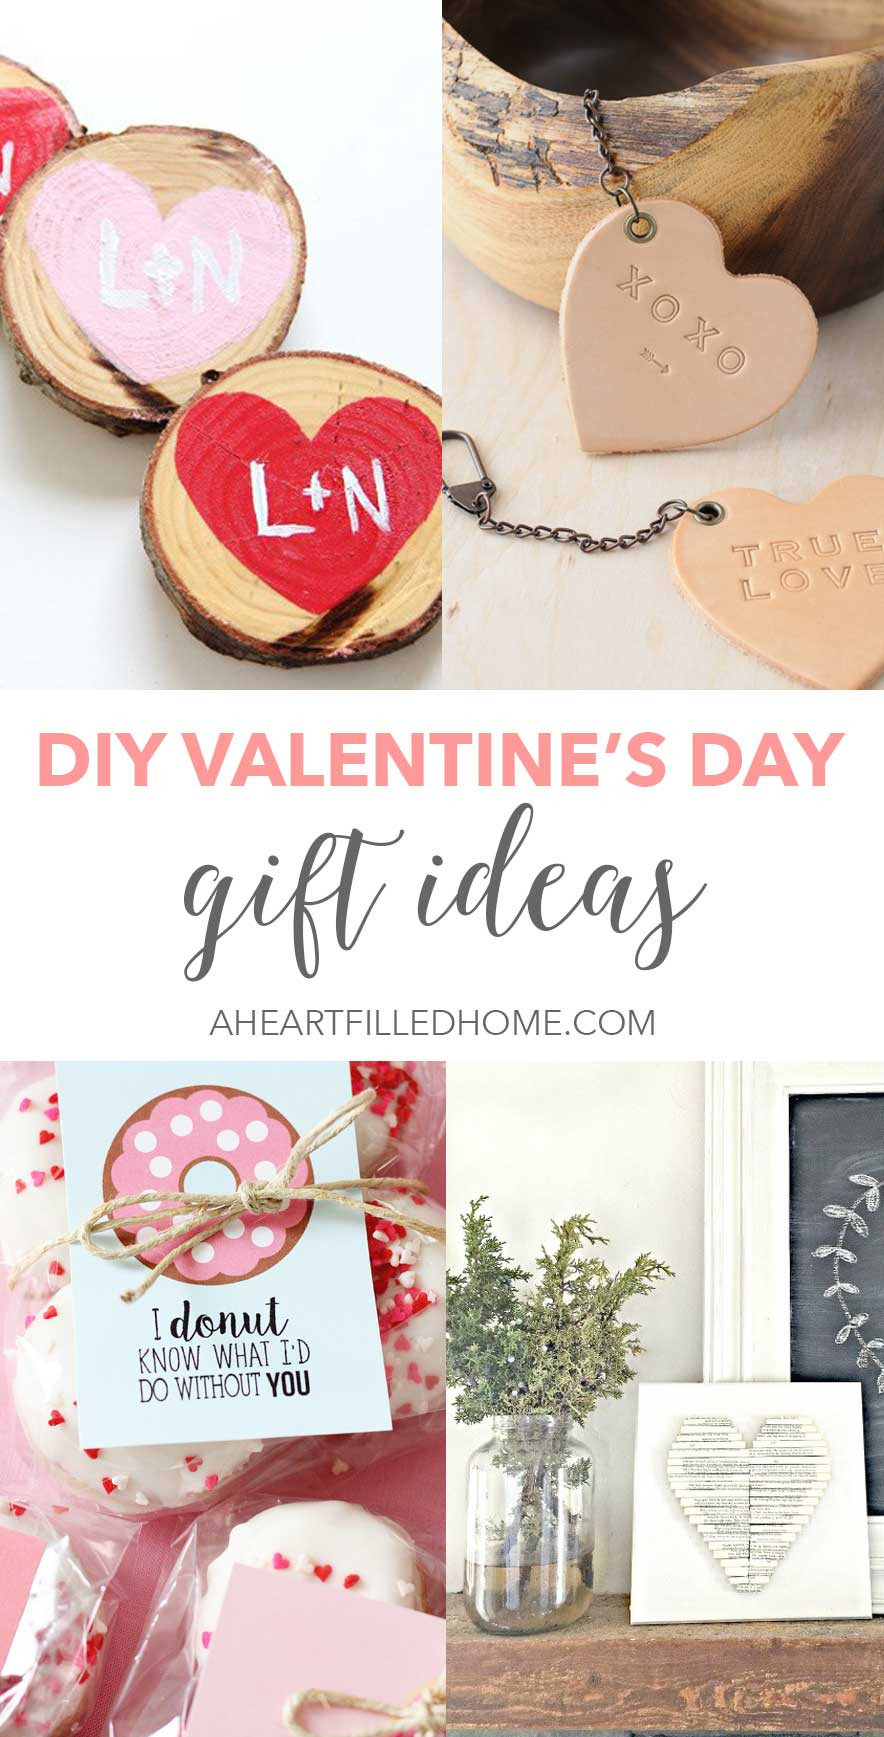 Valentines Day Home Made Gifts
 DIY Valentine s Day Gift Ideas A Heart Filled Home